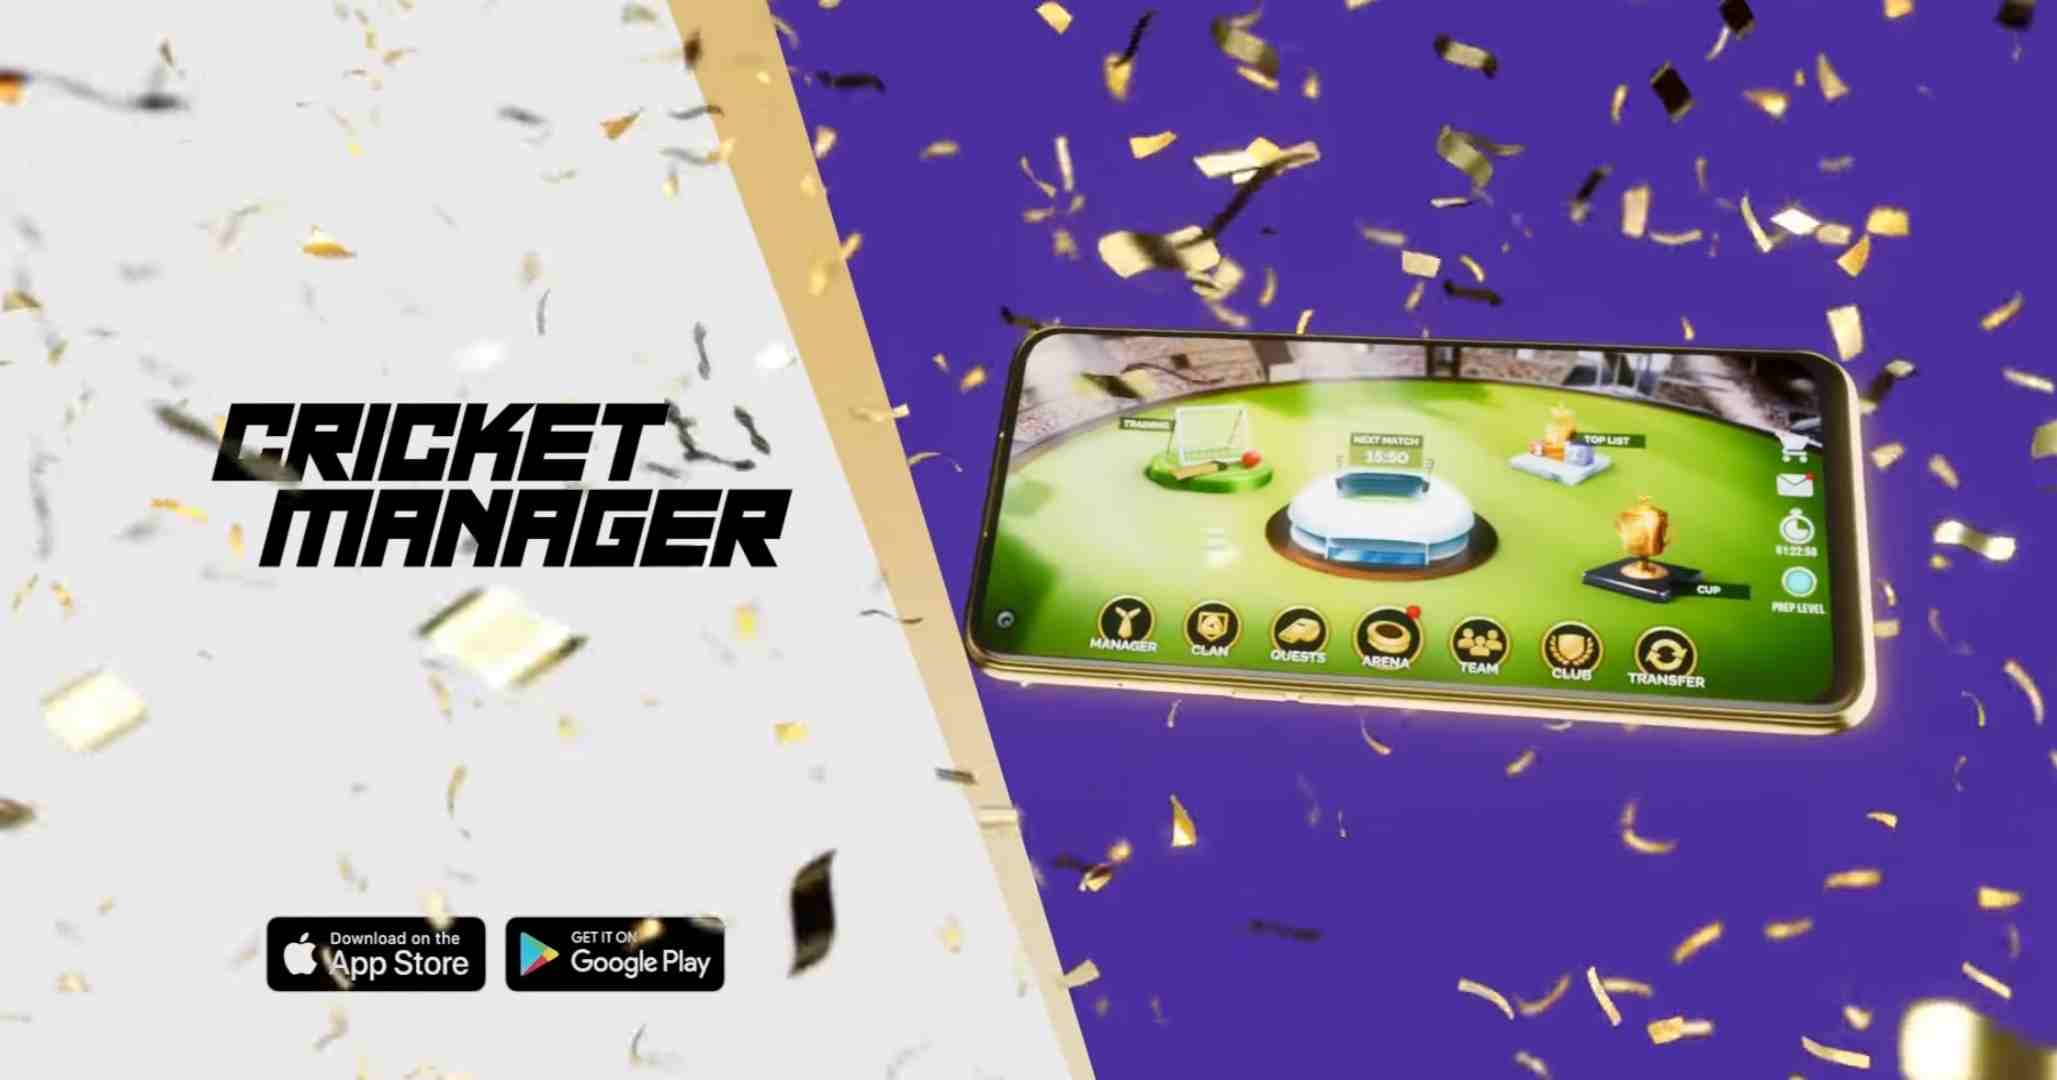 Cricket Manager pro 2022: Download Apk, Game Review & Features